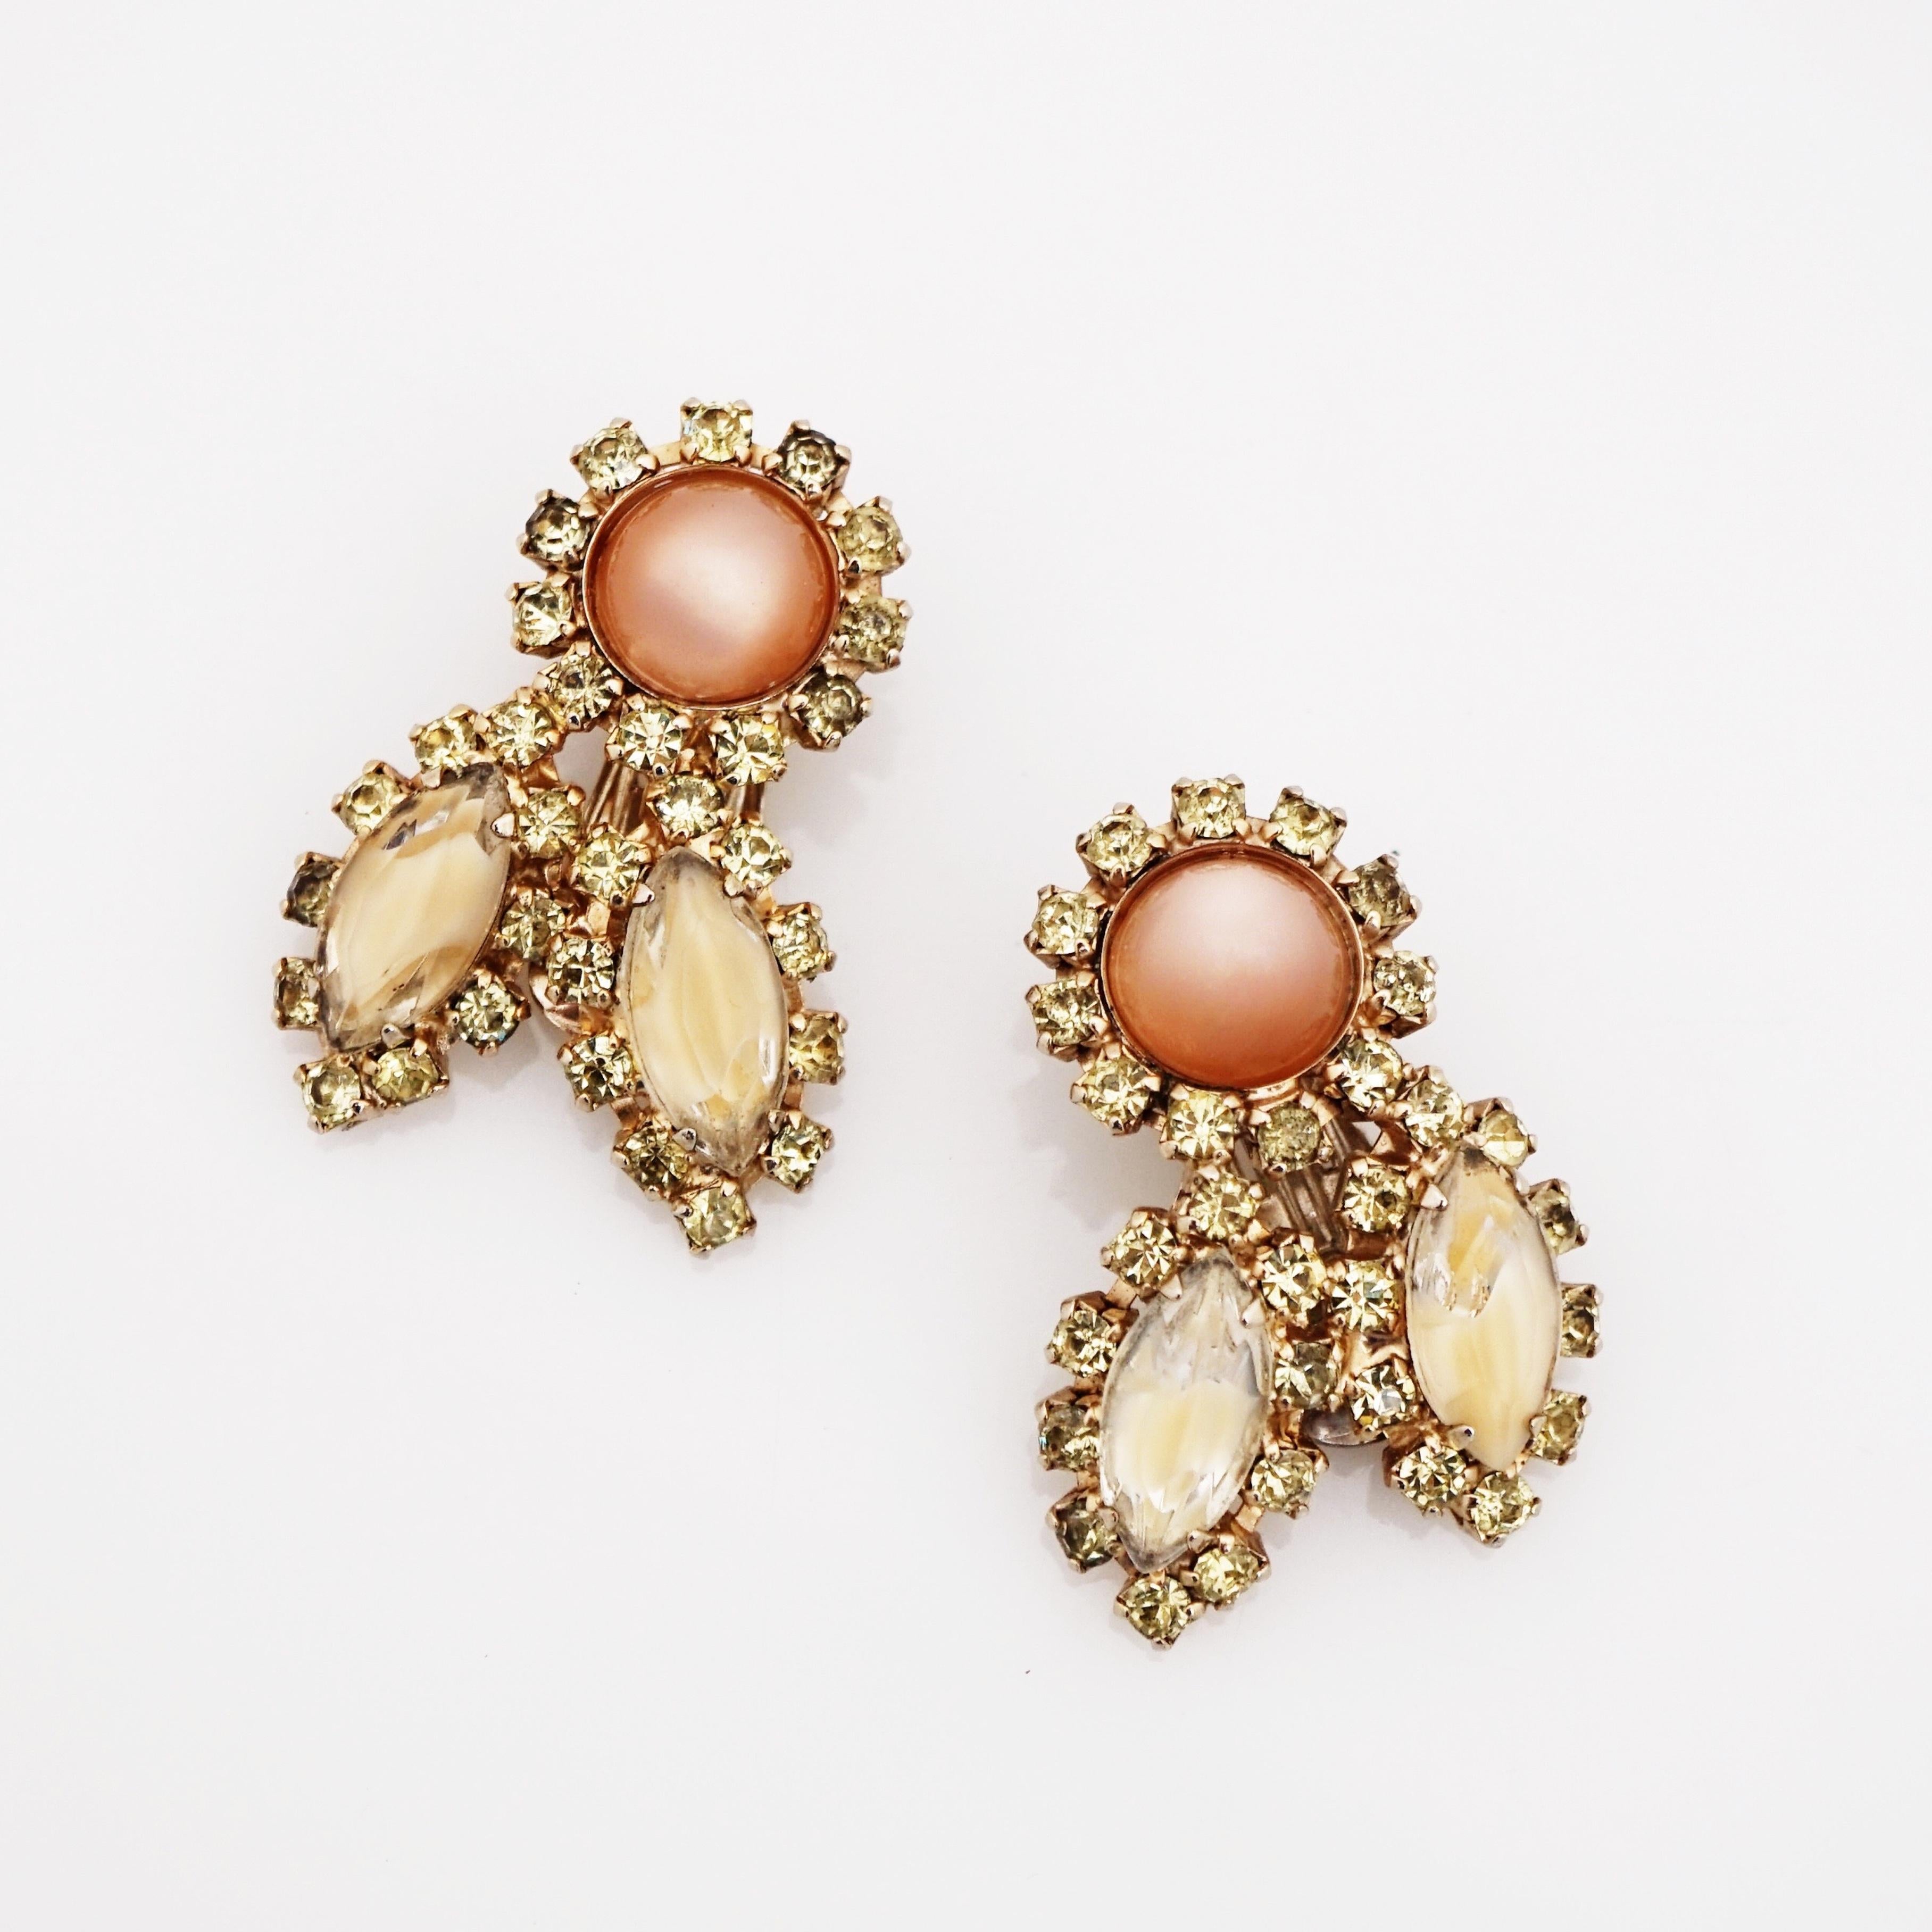 - Vintage item

- Collectible costume jewelry piece from the mid-century

- In the style of Juliana jewelry by DeLizza & Elster

- Each earring measures 1.5